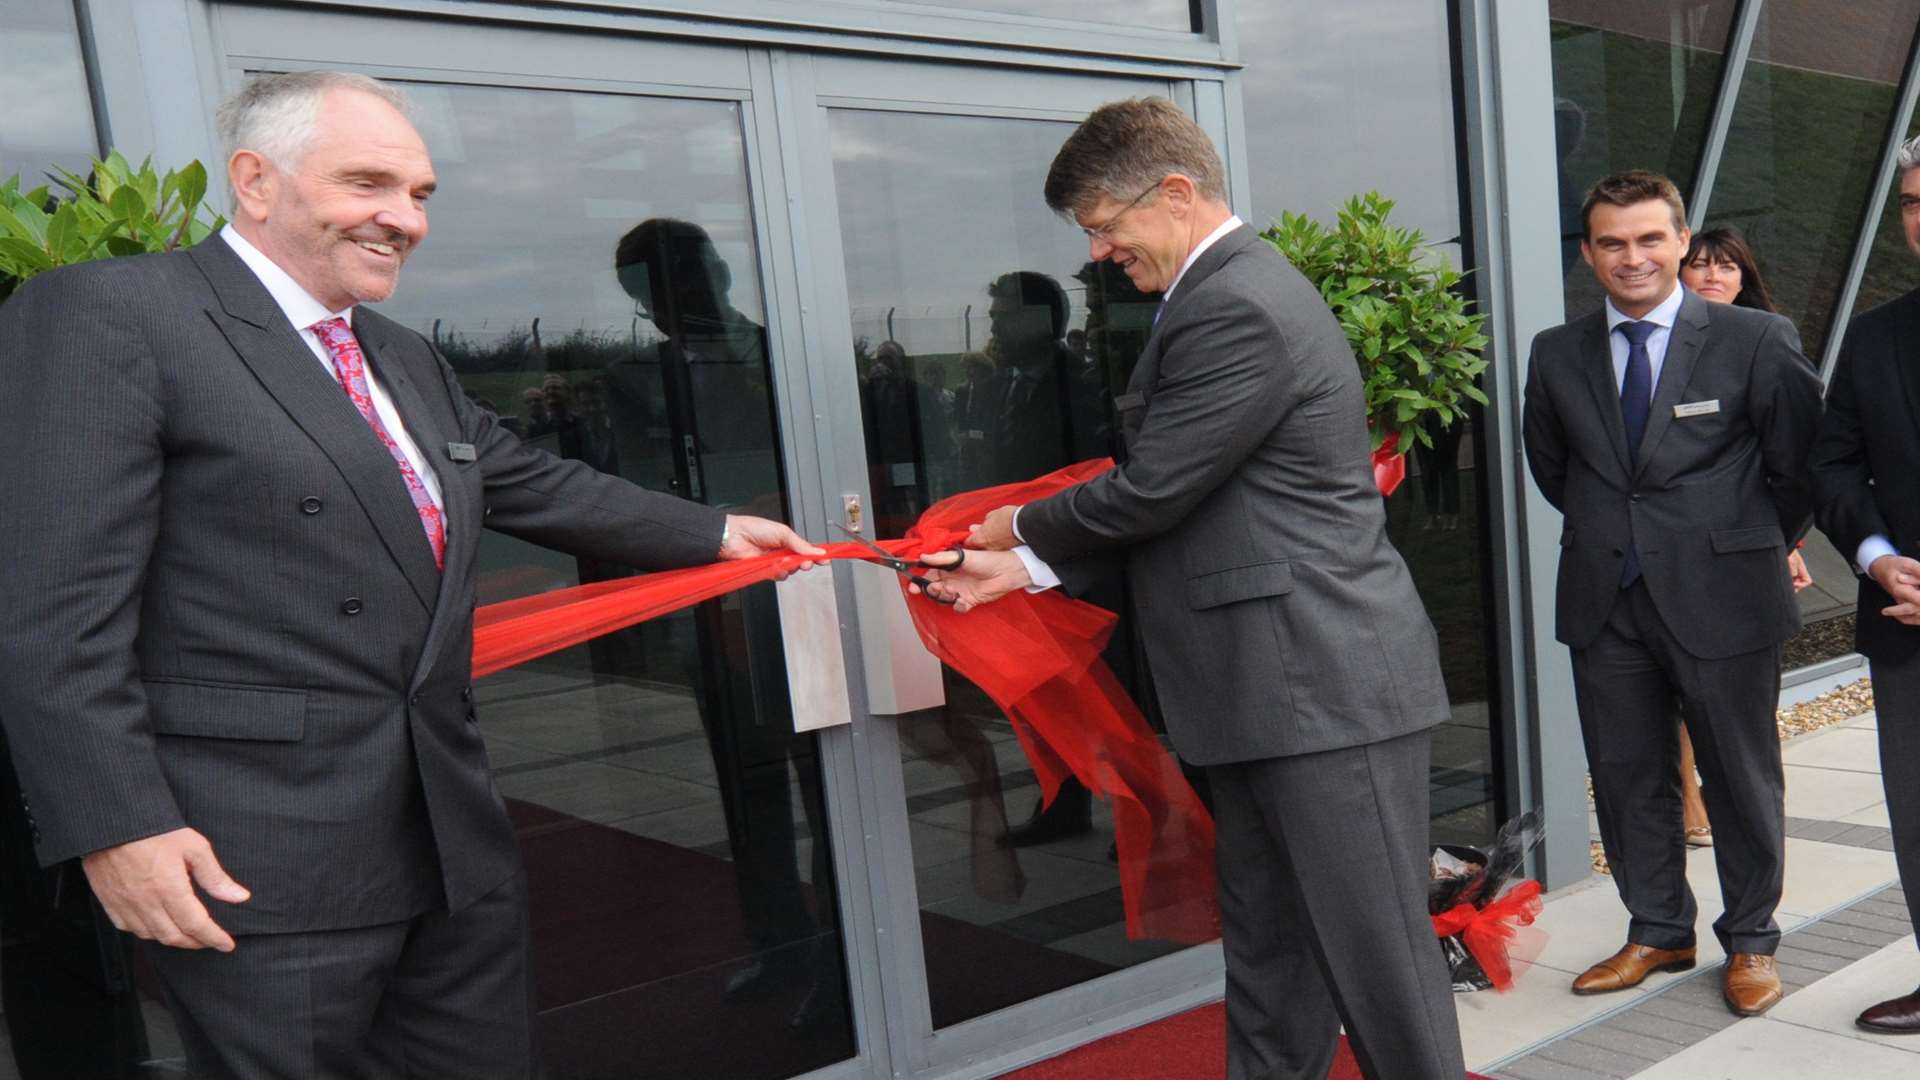 Ken Wills, far left, pictured at a ribbon-cutting ceremony at Heli Charter when the firm opened the UK's first purpose-built helicopter showroom and maintenance facility.